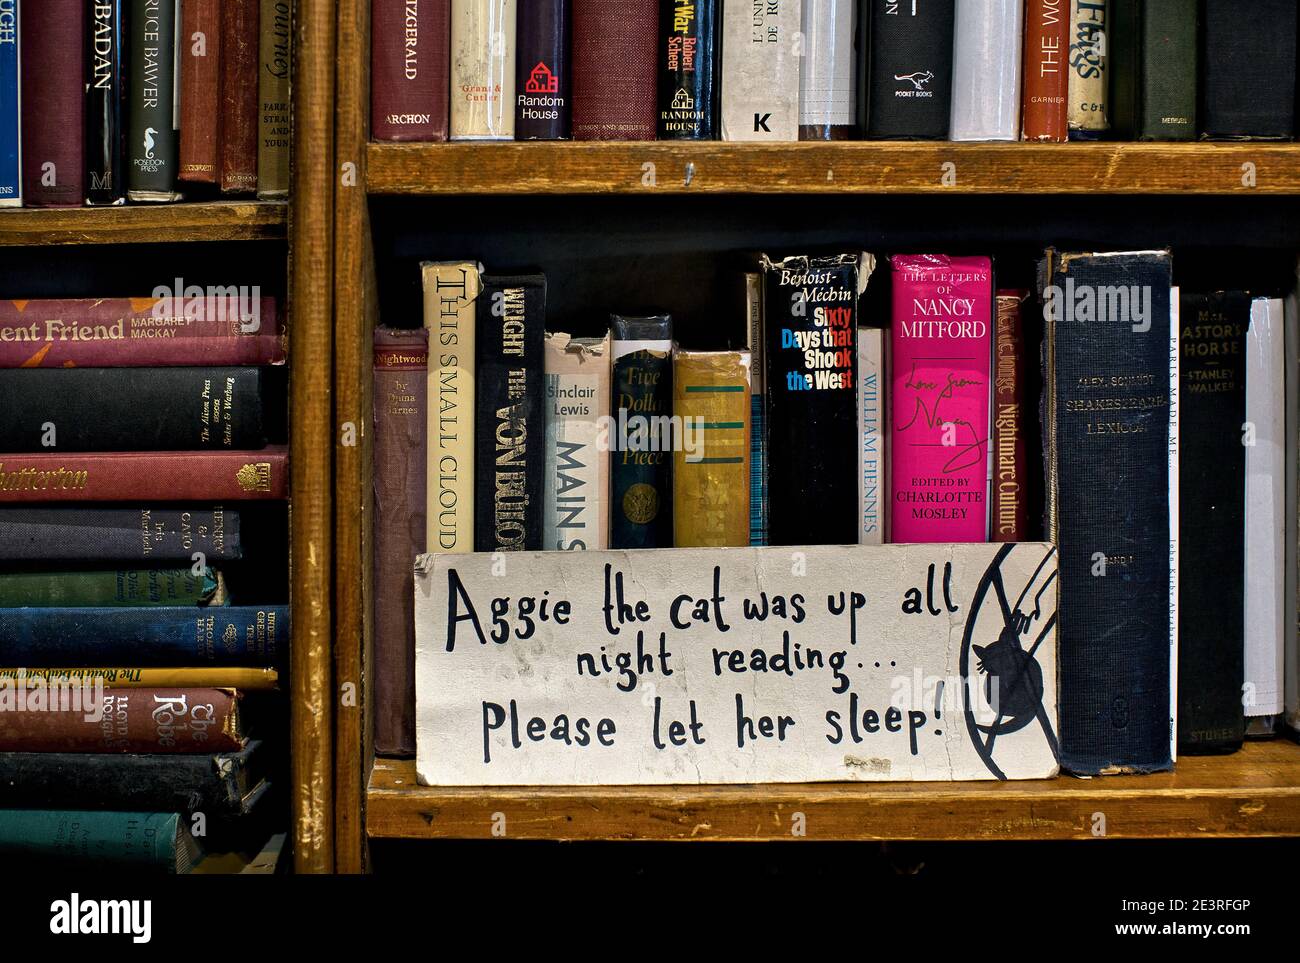 FRANCE / IIe-de-France / Paris / Independent bookstore Shakespeare and Company in Paris . Stock Photo